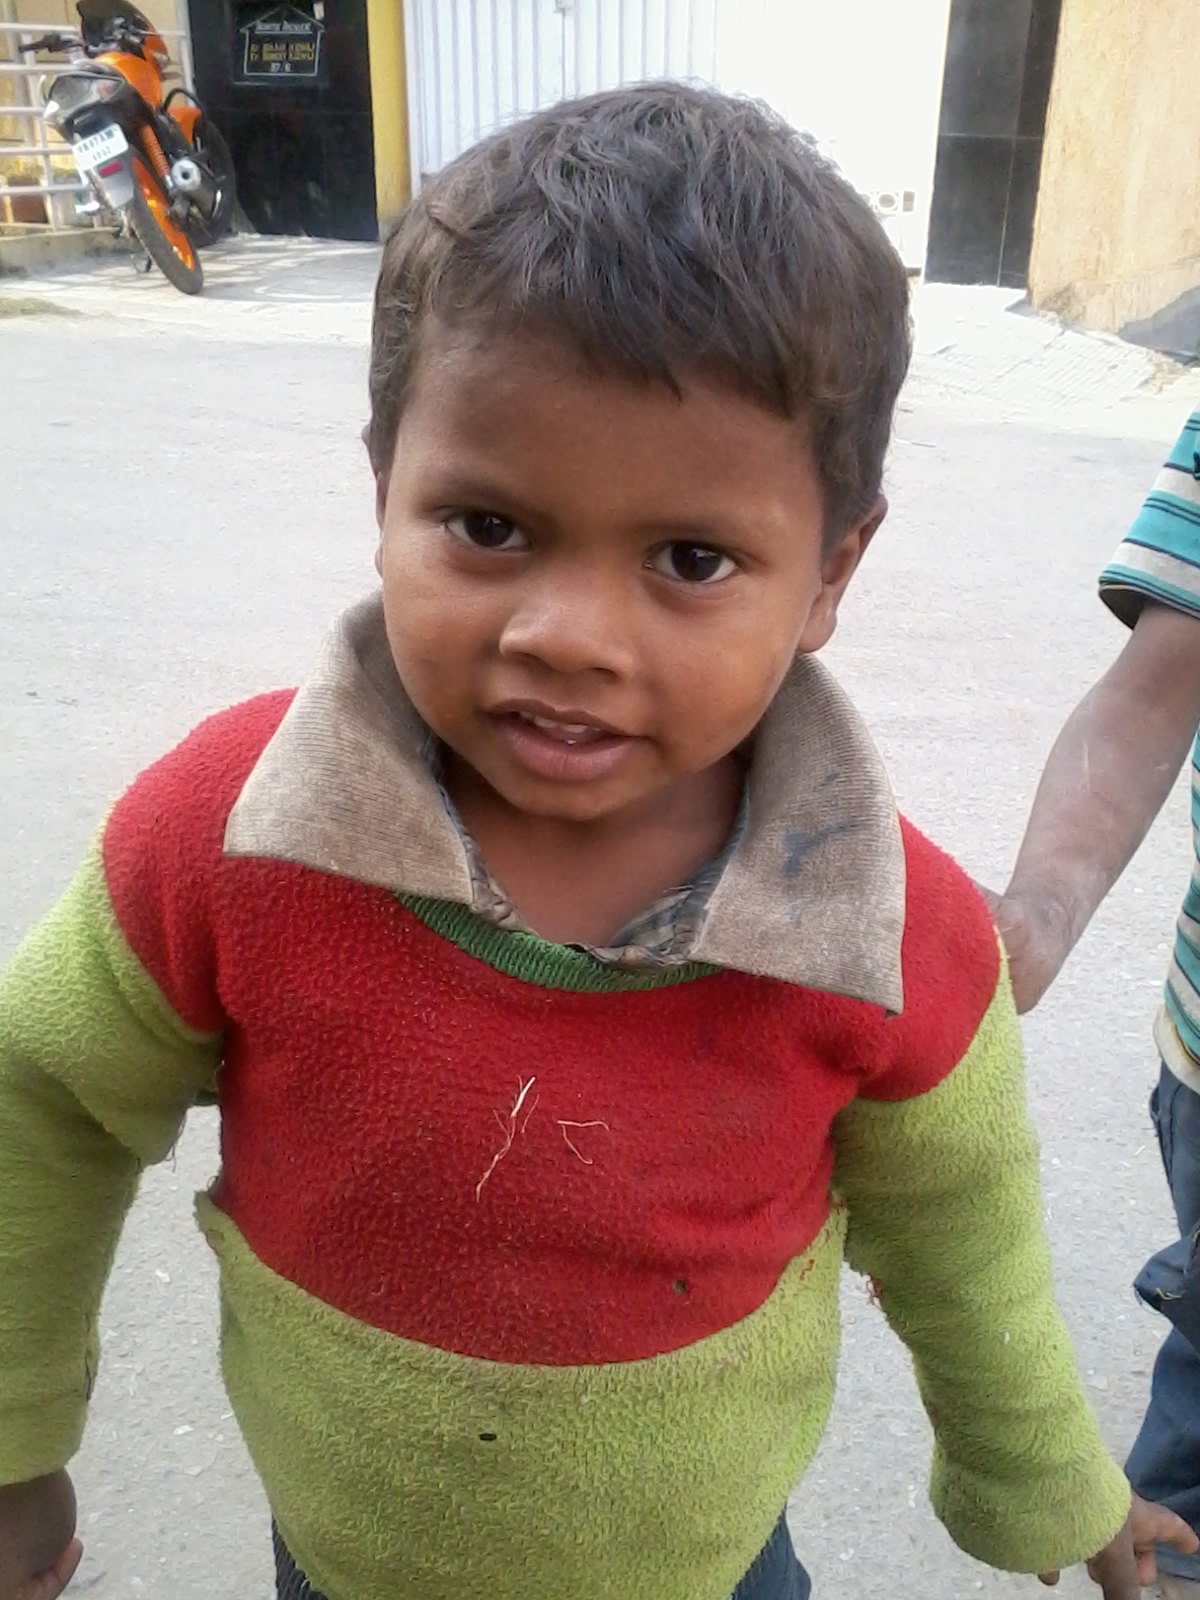 Eating hot buns in Jammu's cold morning... child is so happy